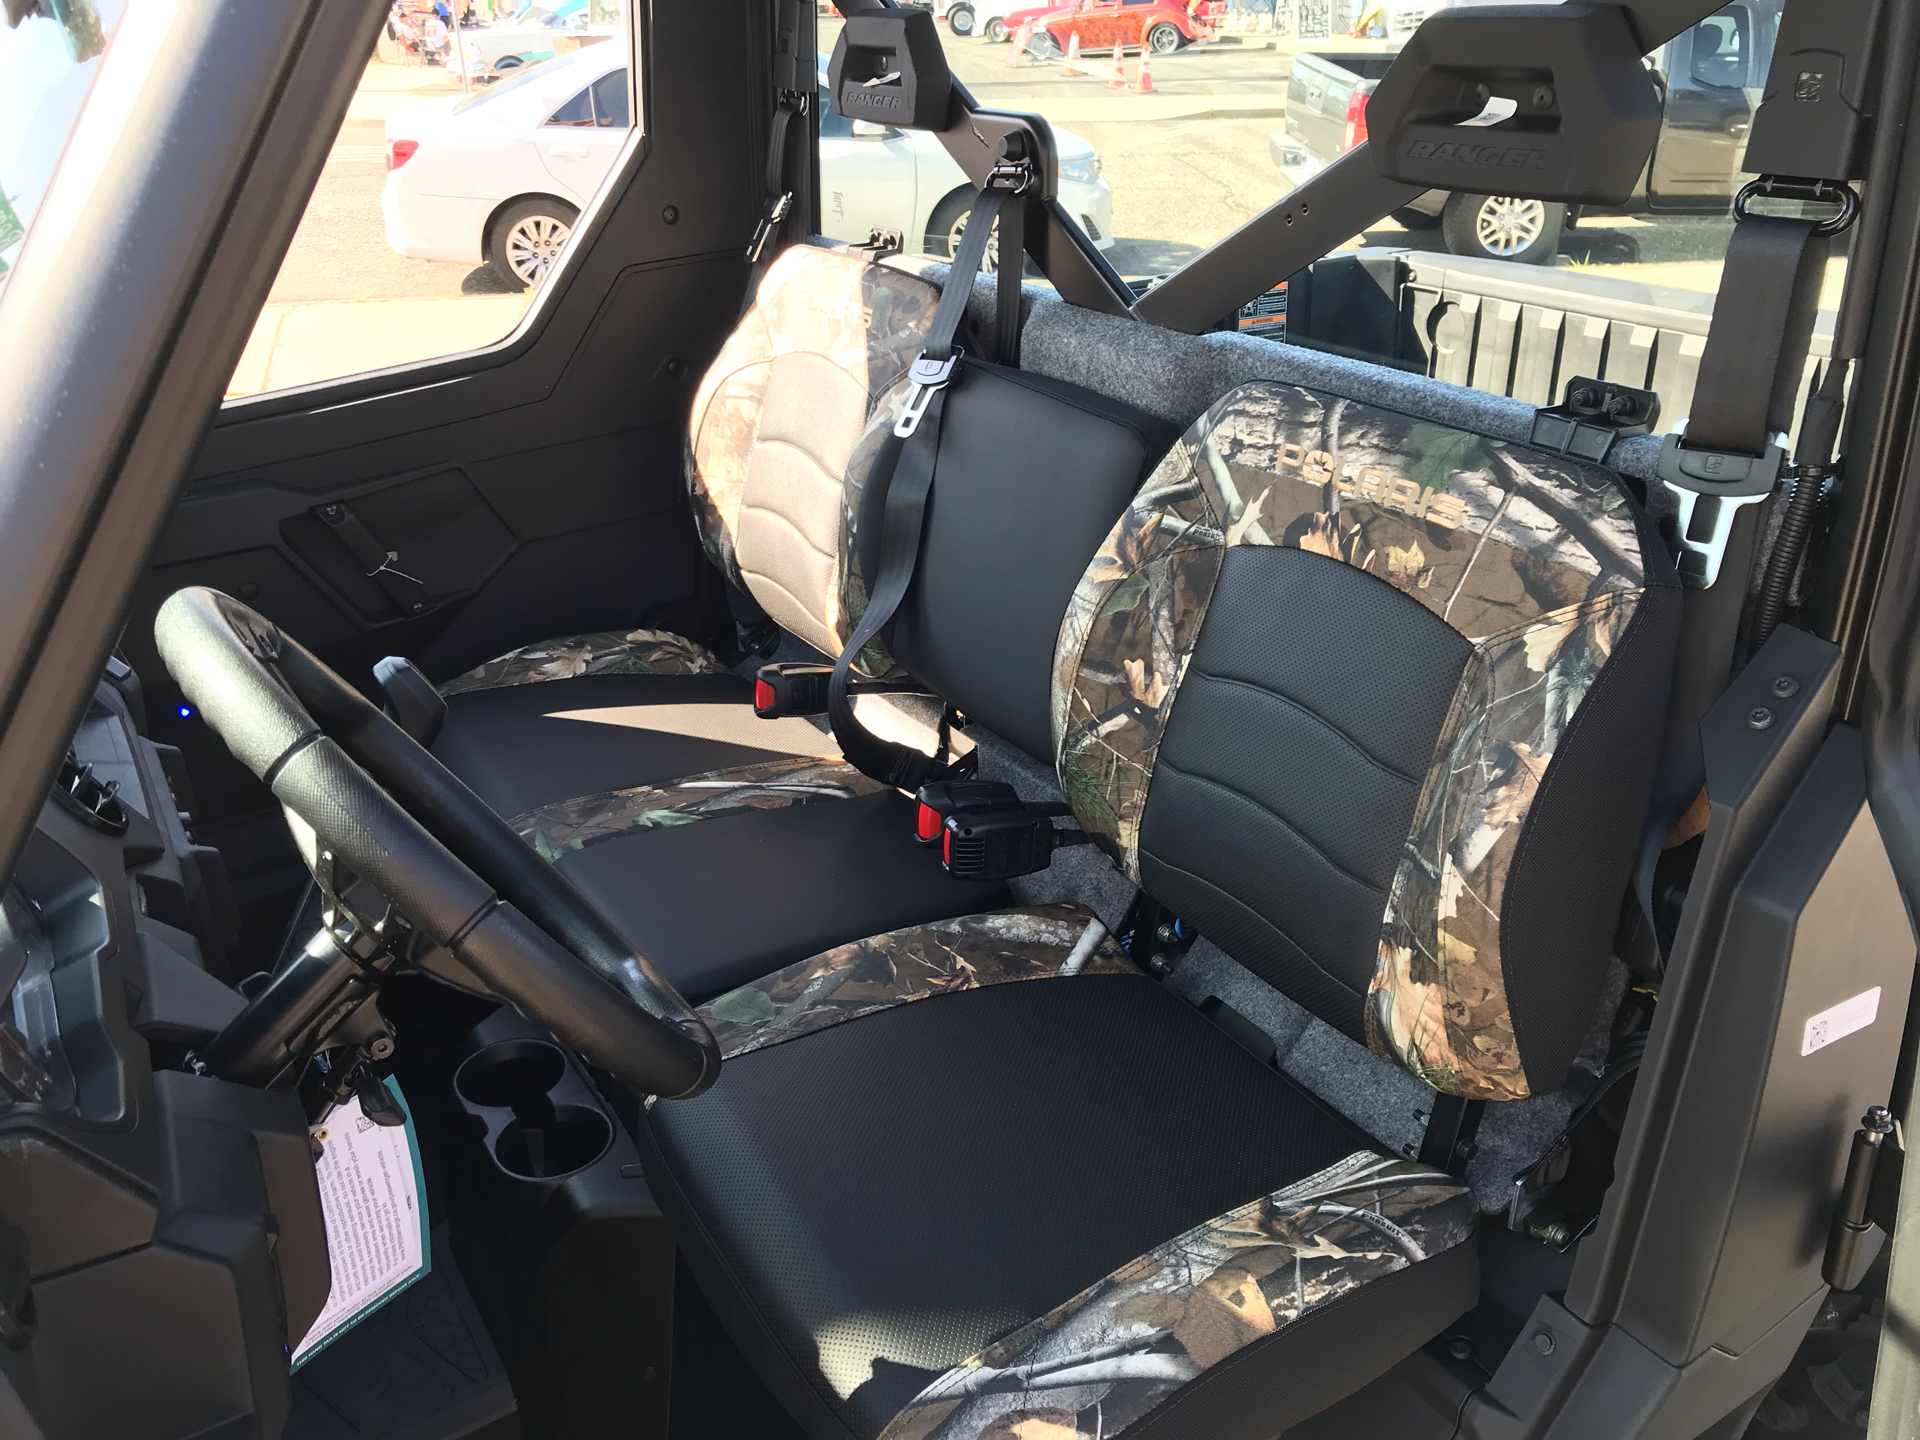 2023 Polaris Ranger XP 1000 Northstar Edition Ultimate - Ride Command Package in Redding, California - Photo 3